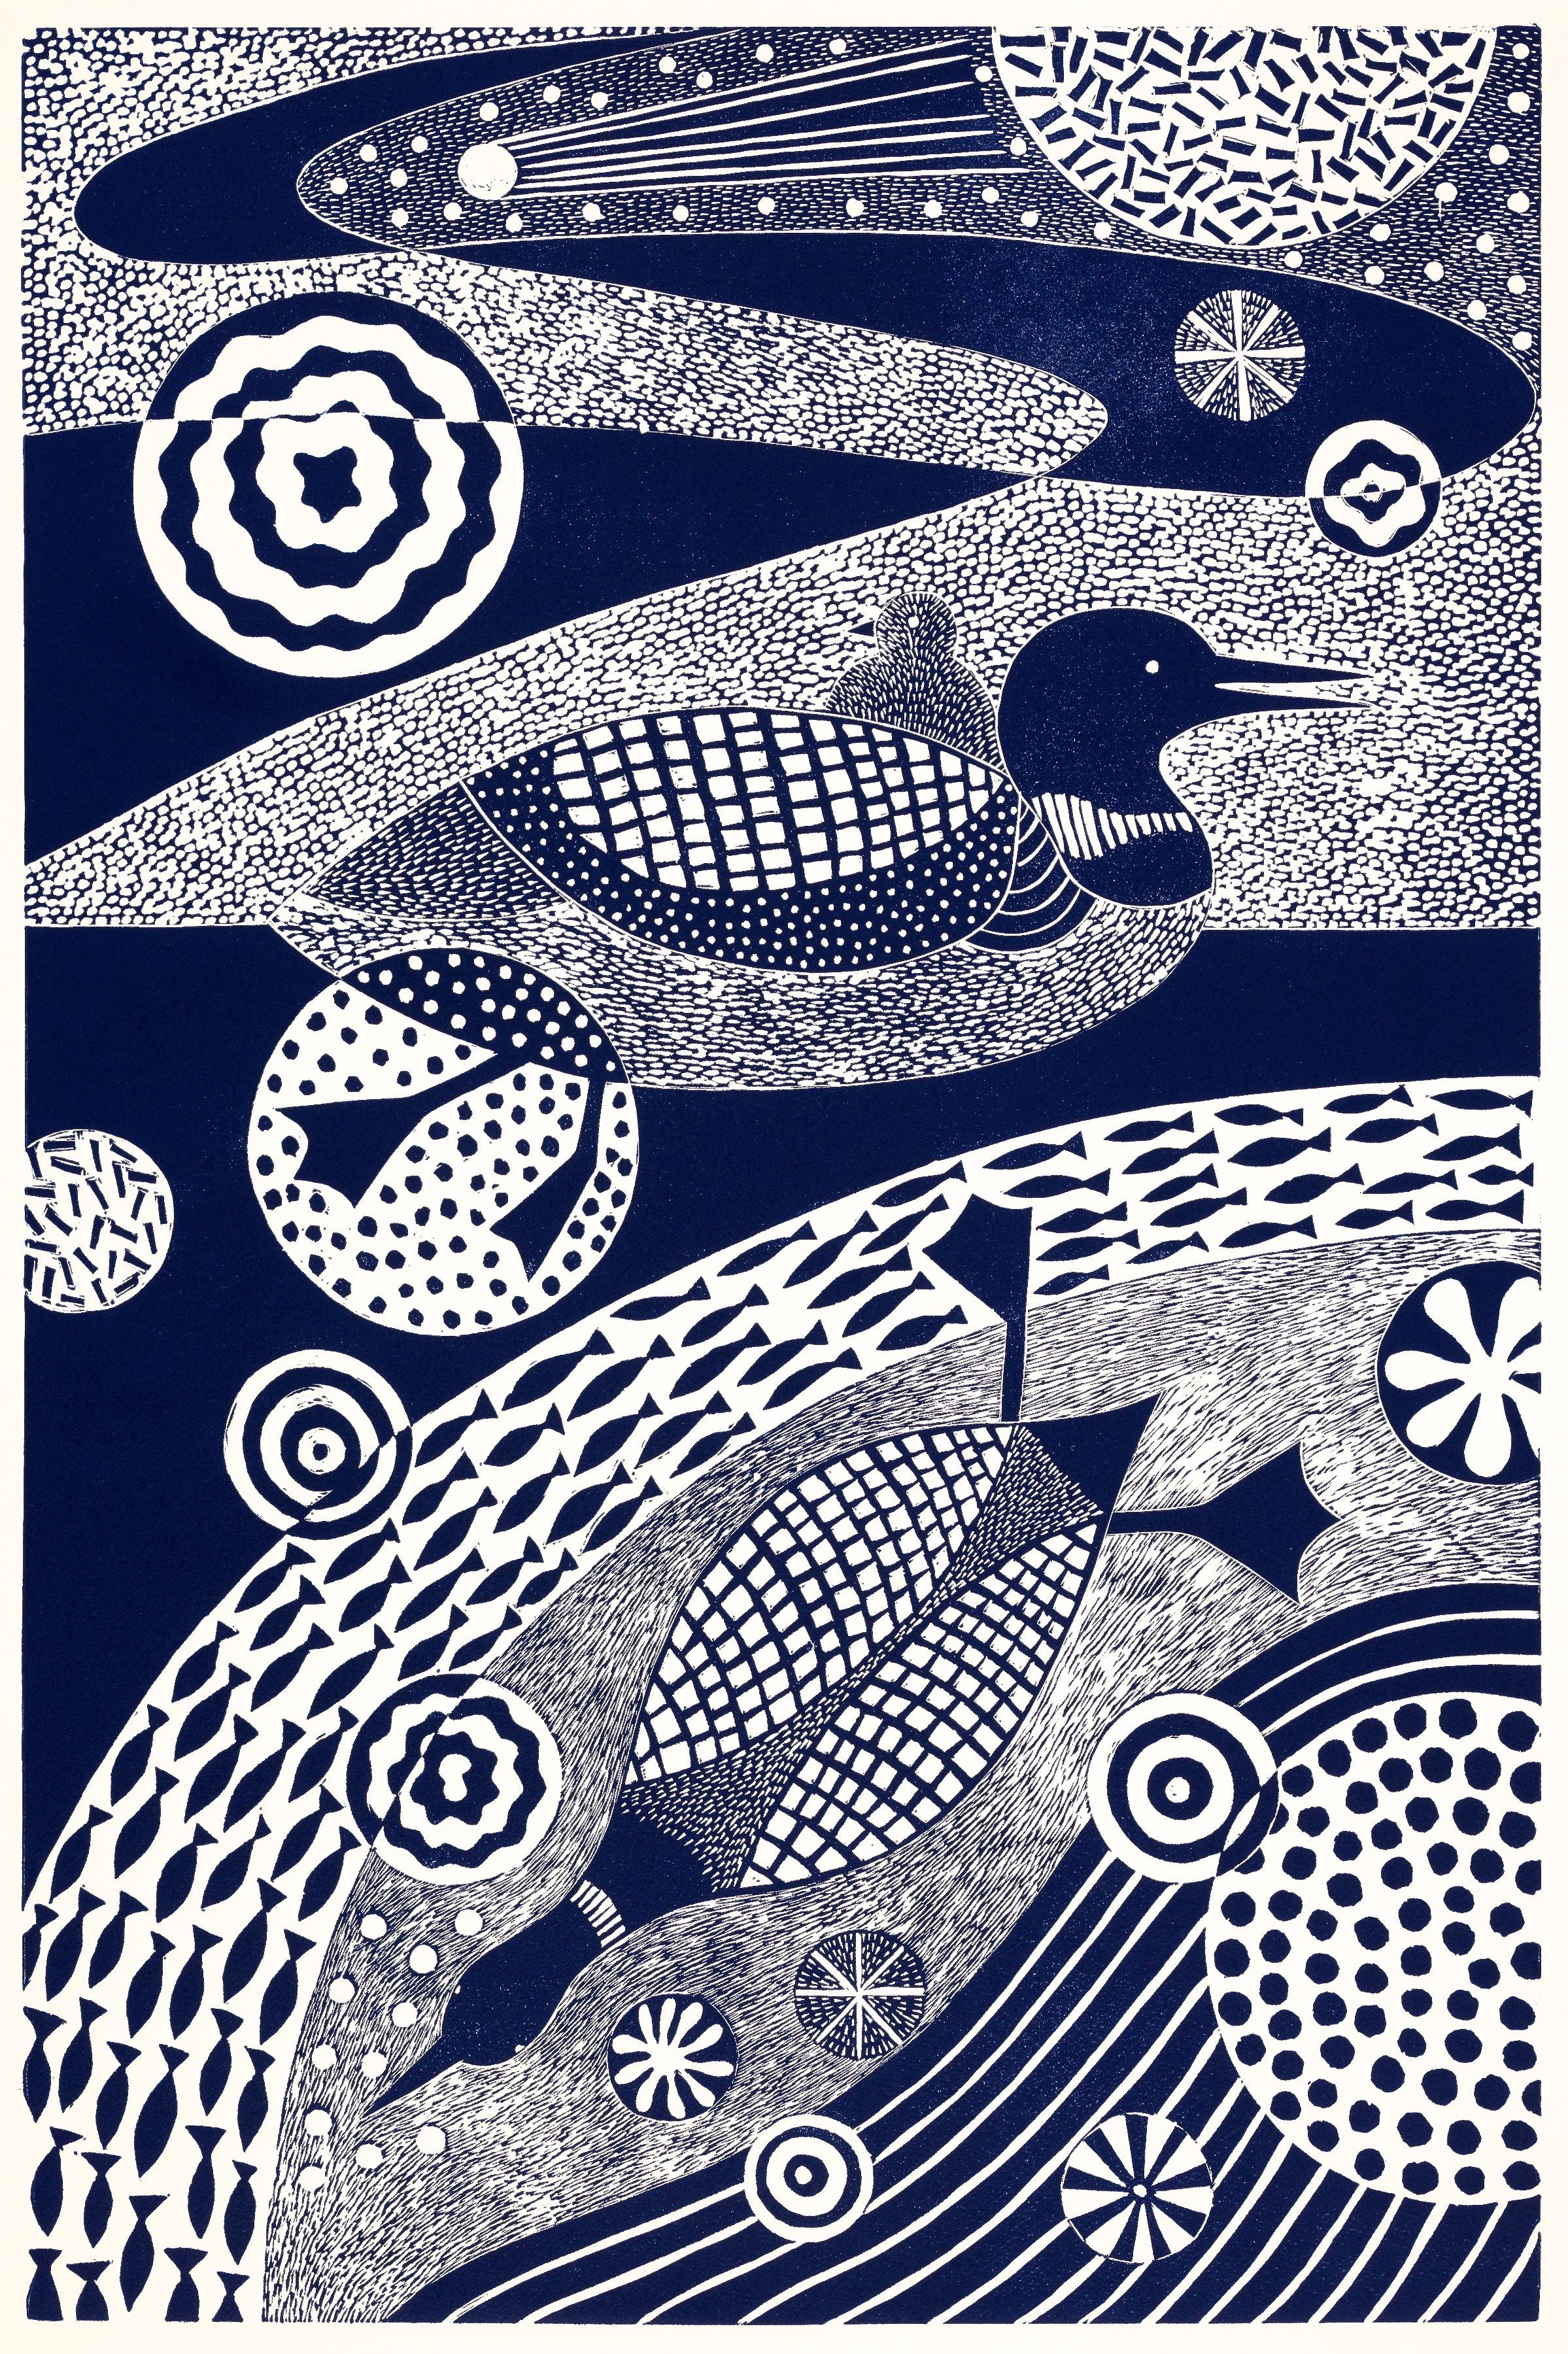 'Wading and Wondering,'  Linoleum Block Print, Edition 10,  35 1/4 x 23 1/4 Inches, is one of a series of 8 related prints in this size in varying shades of blue.   Sold individually or as sets of 2, 3, 4, 5, 6, 7 or 8. 

There is also a separate